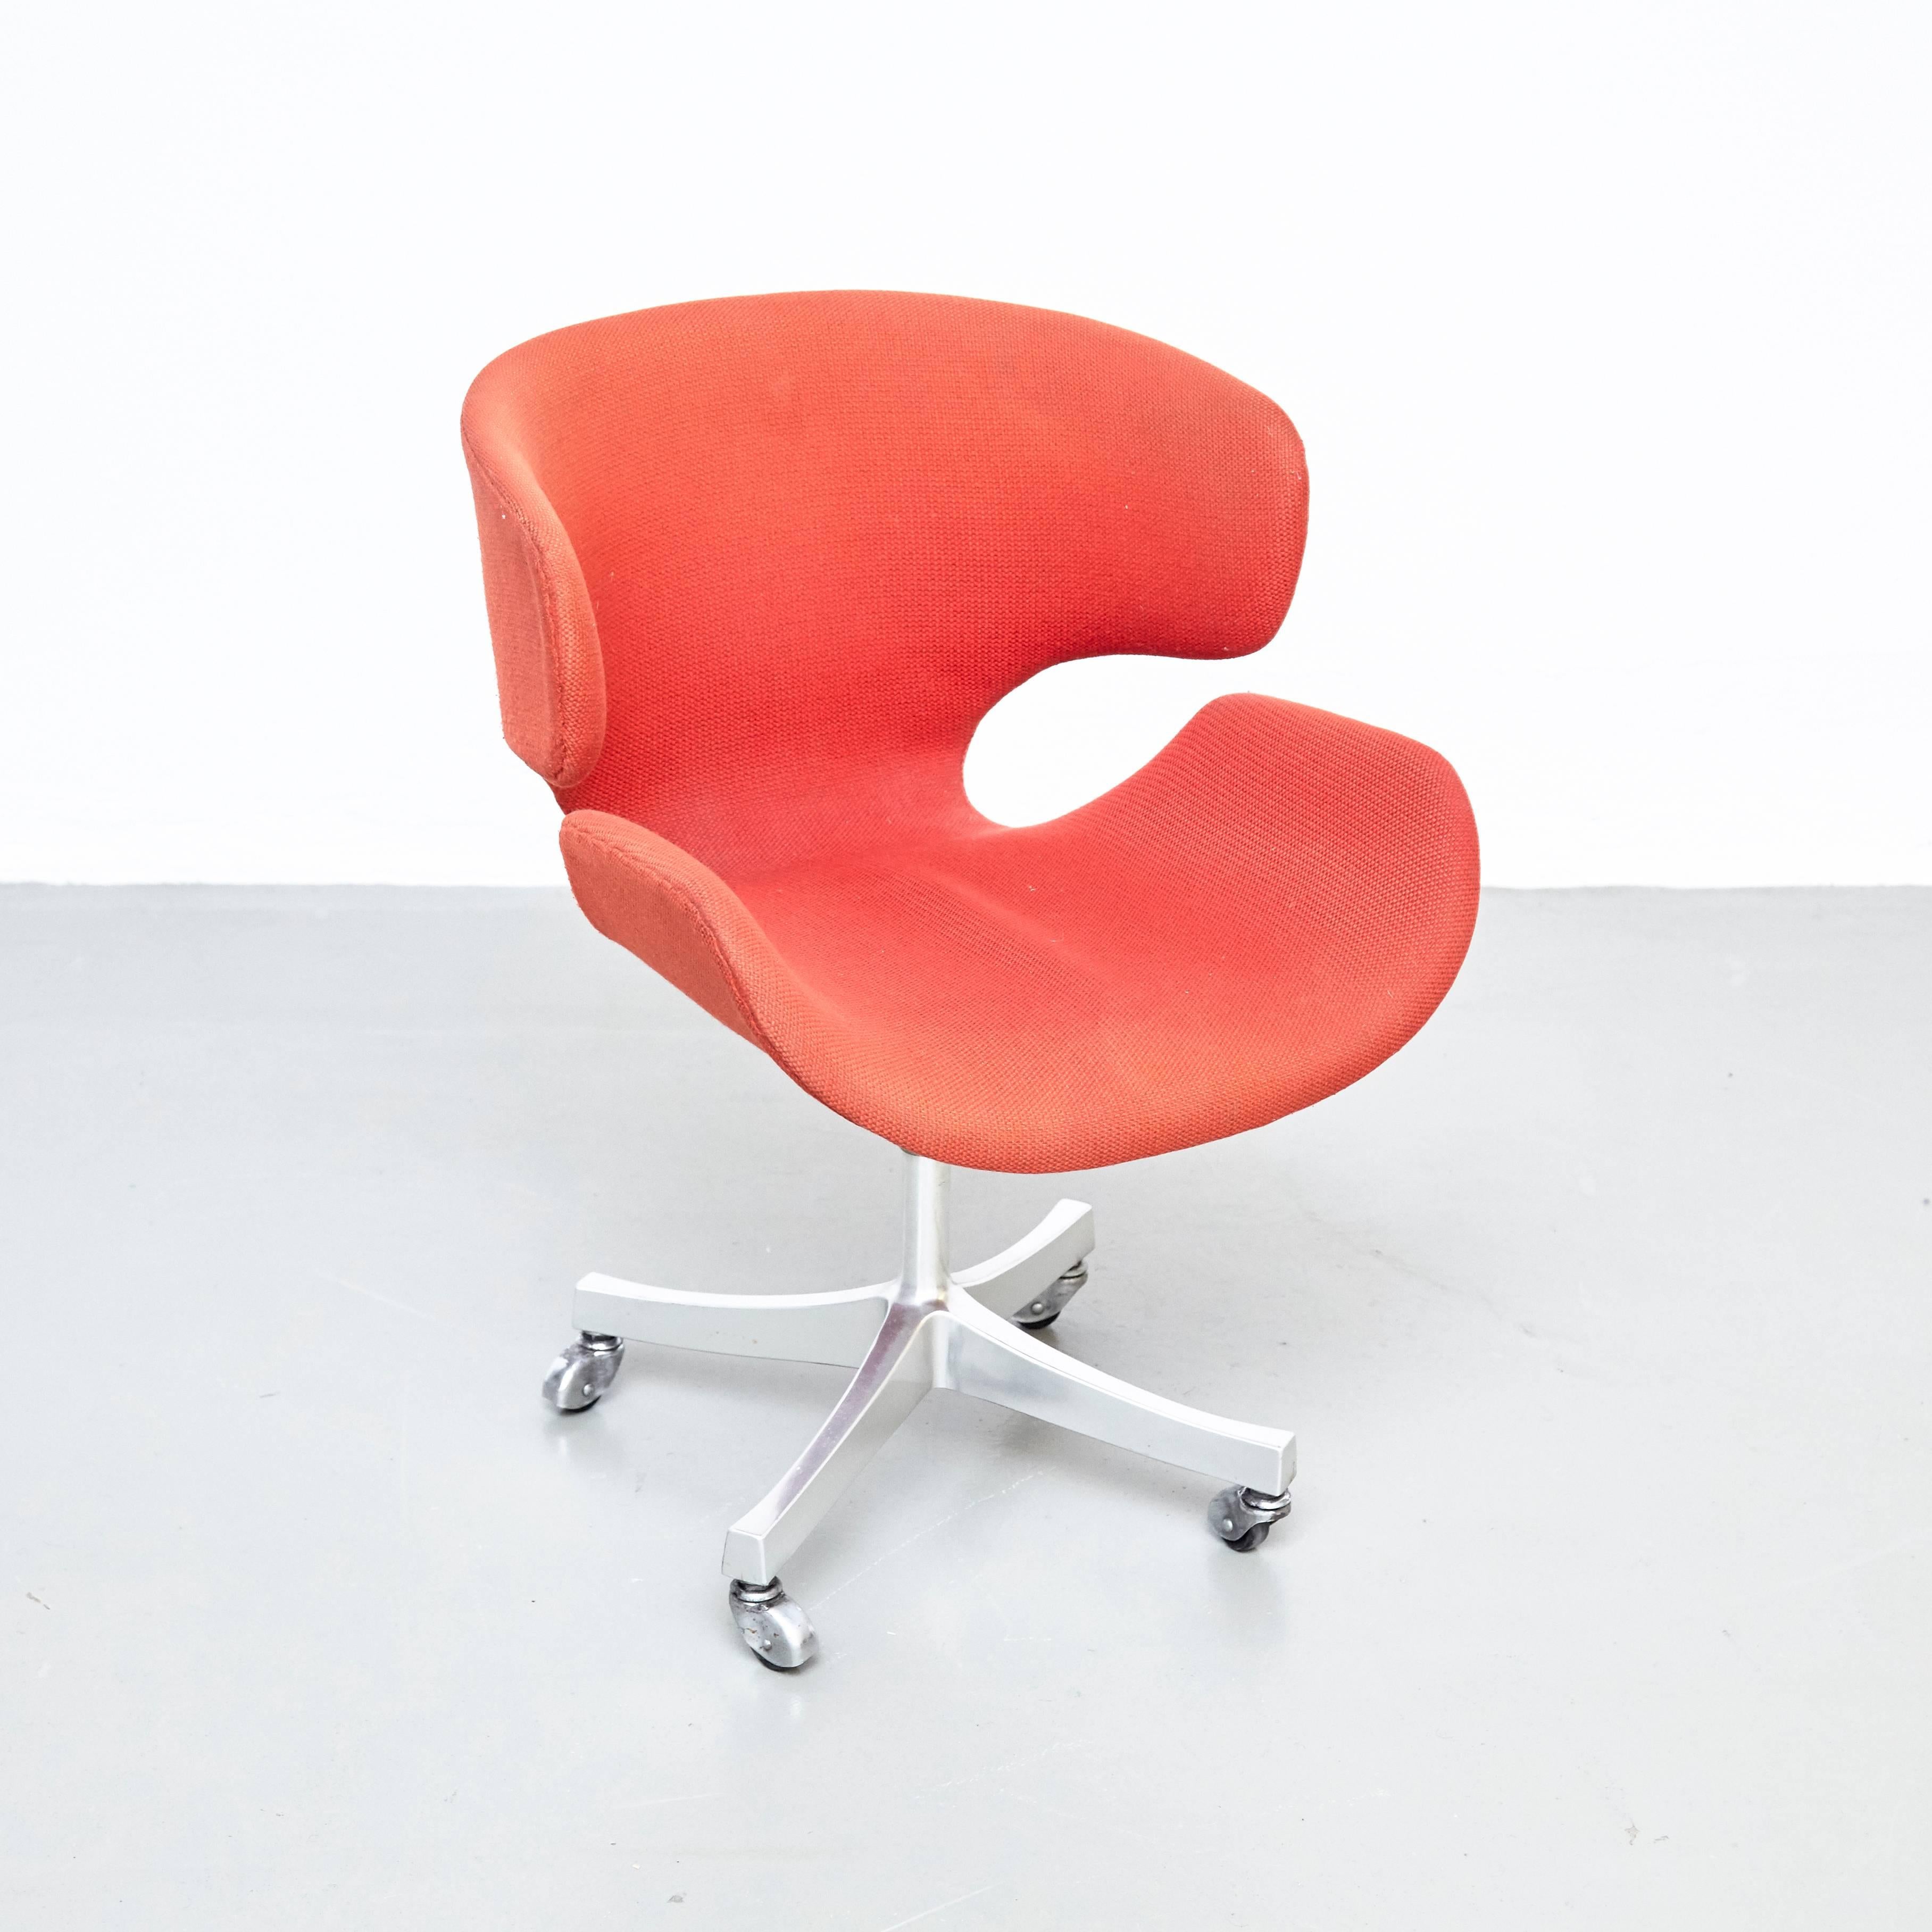 1960s office chair